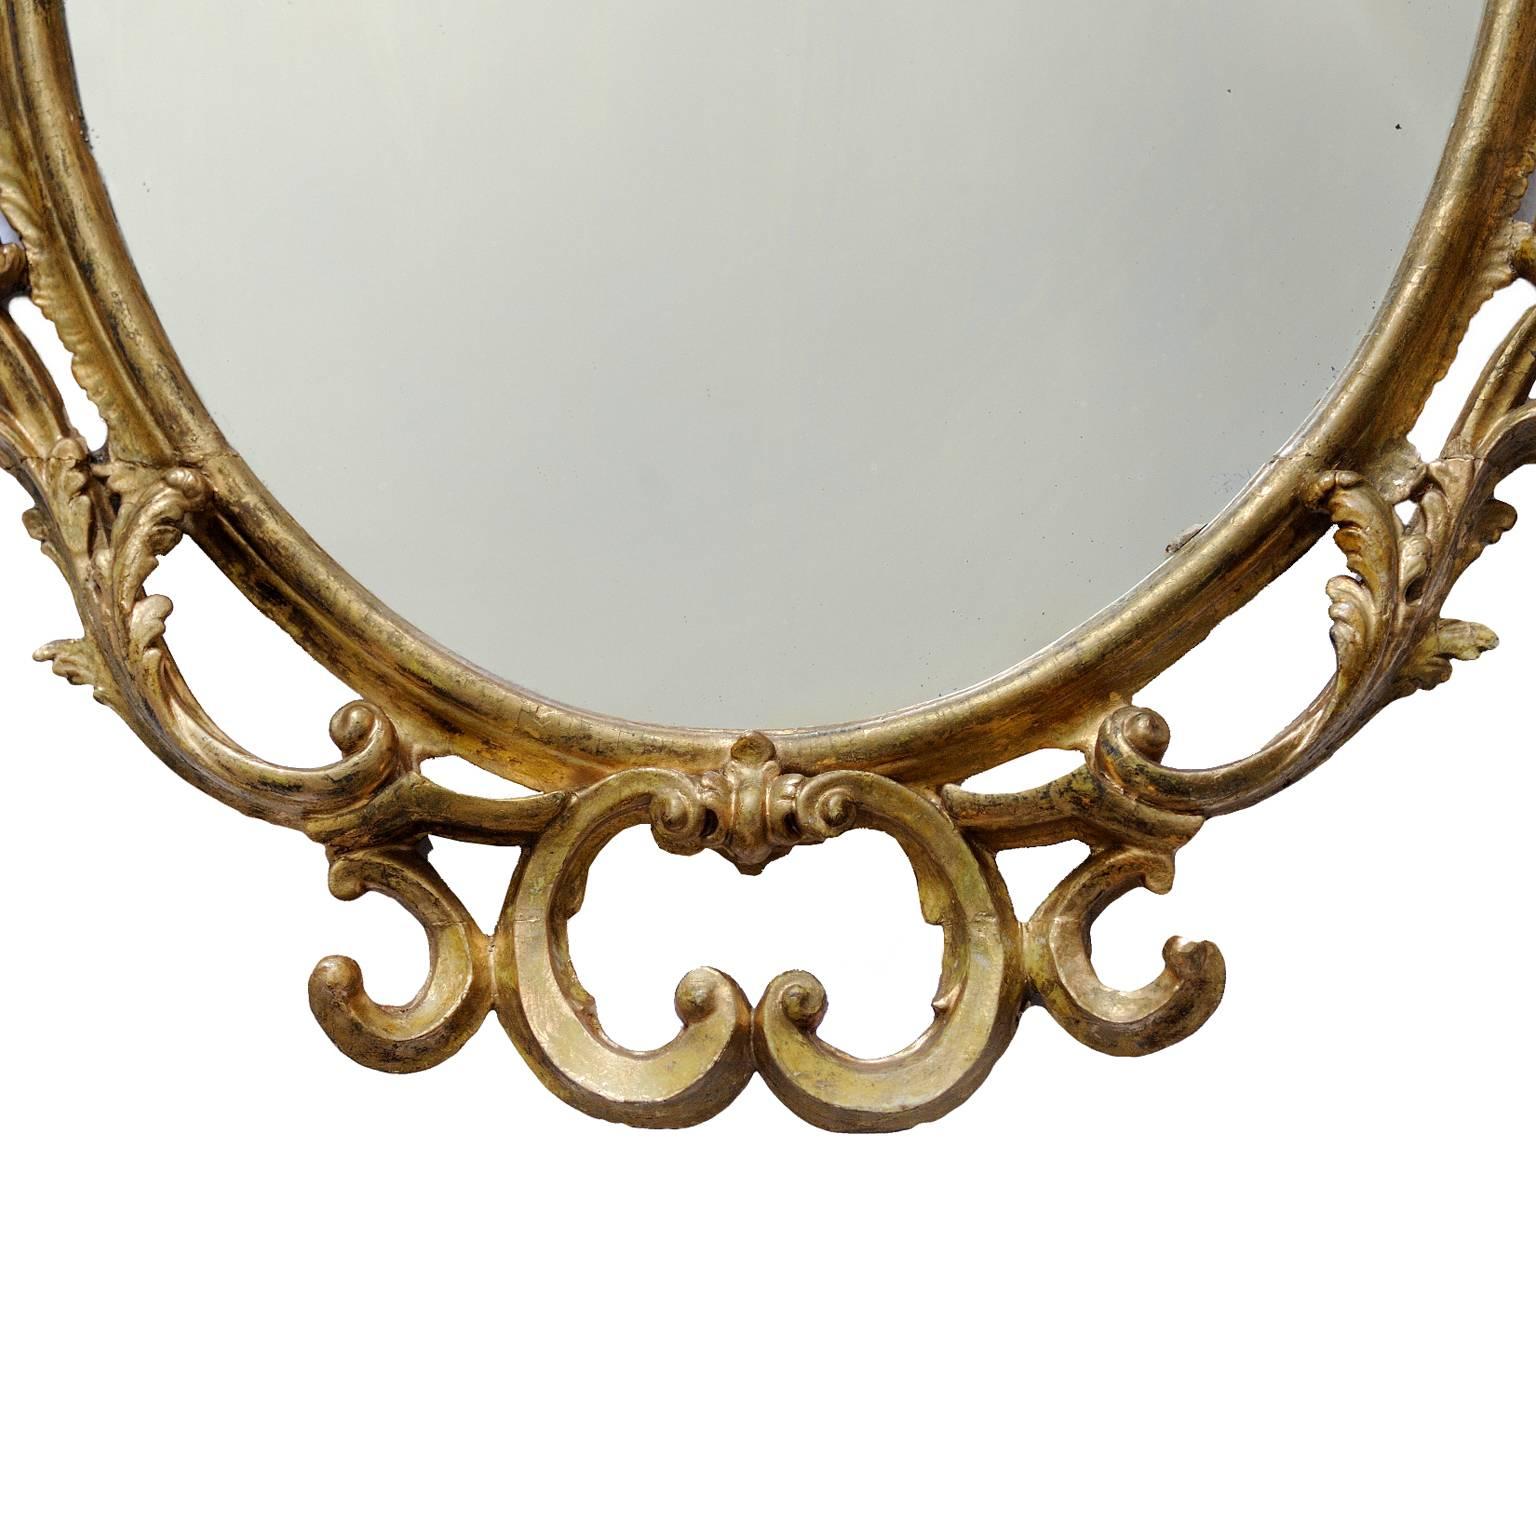 Rococo Revival Large George II Style Carved Wood Gilt Mirror, circa 1860 For Sale